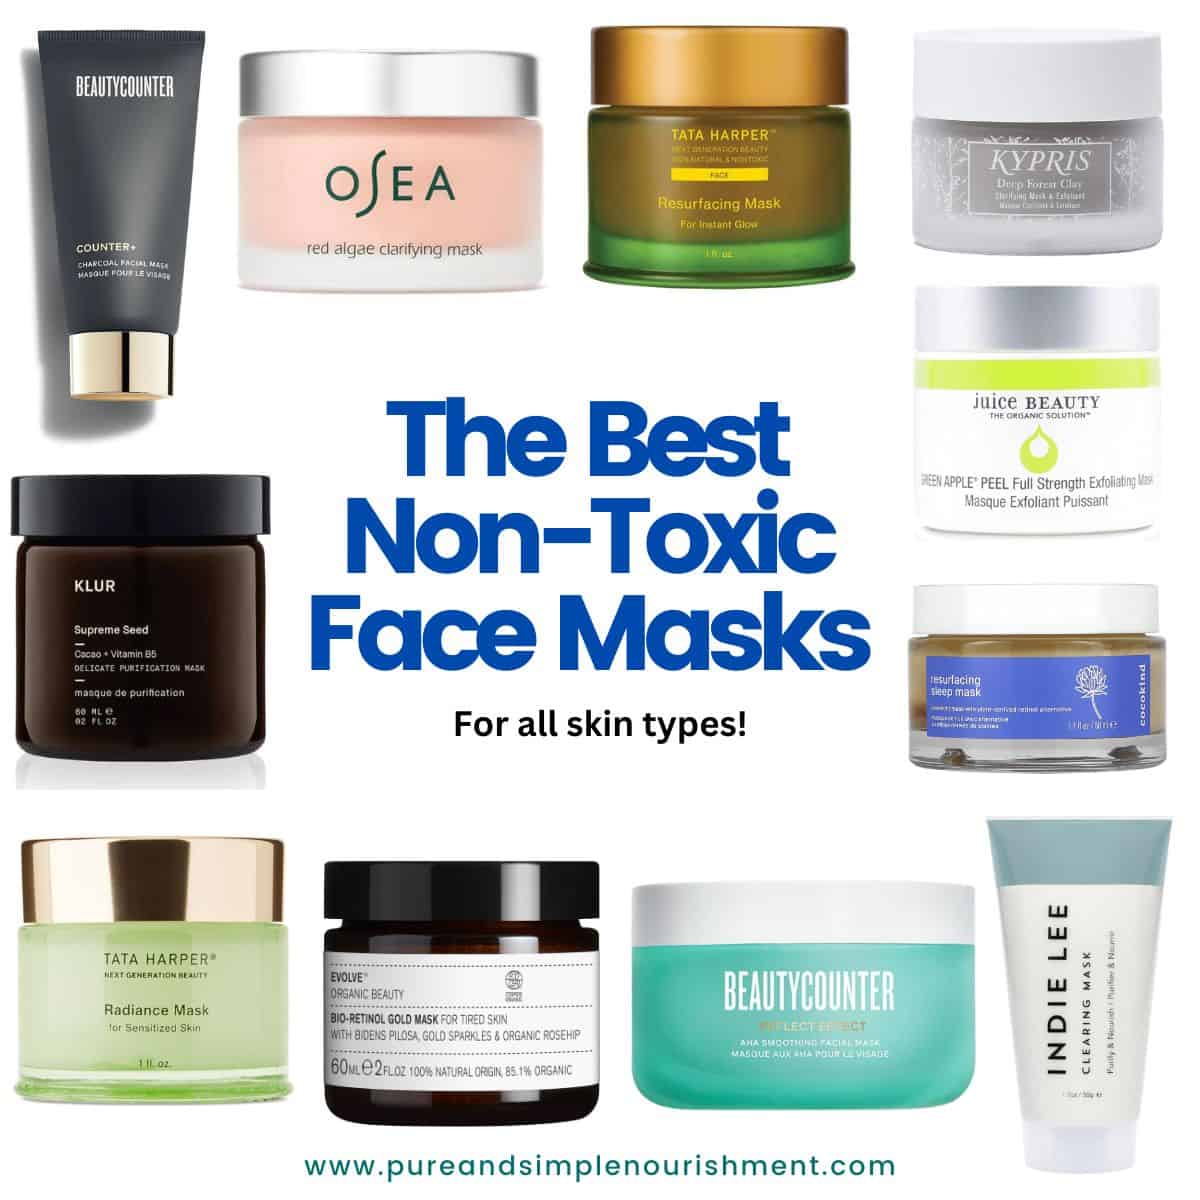 A collage of face masks with the title The Best Non-Toxic Face Masks on it.